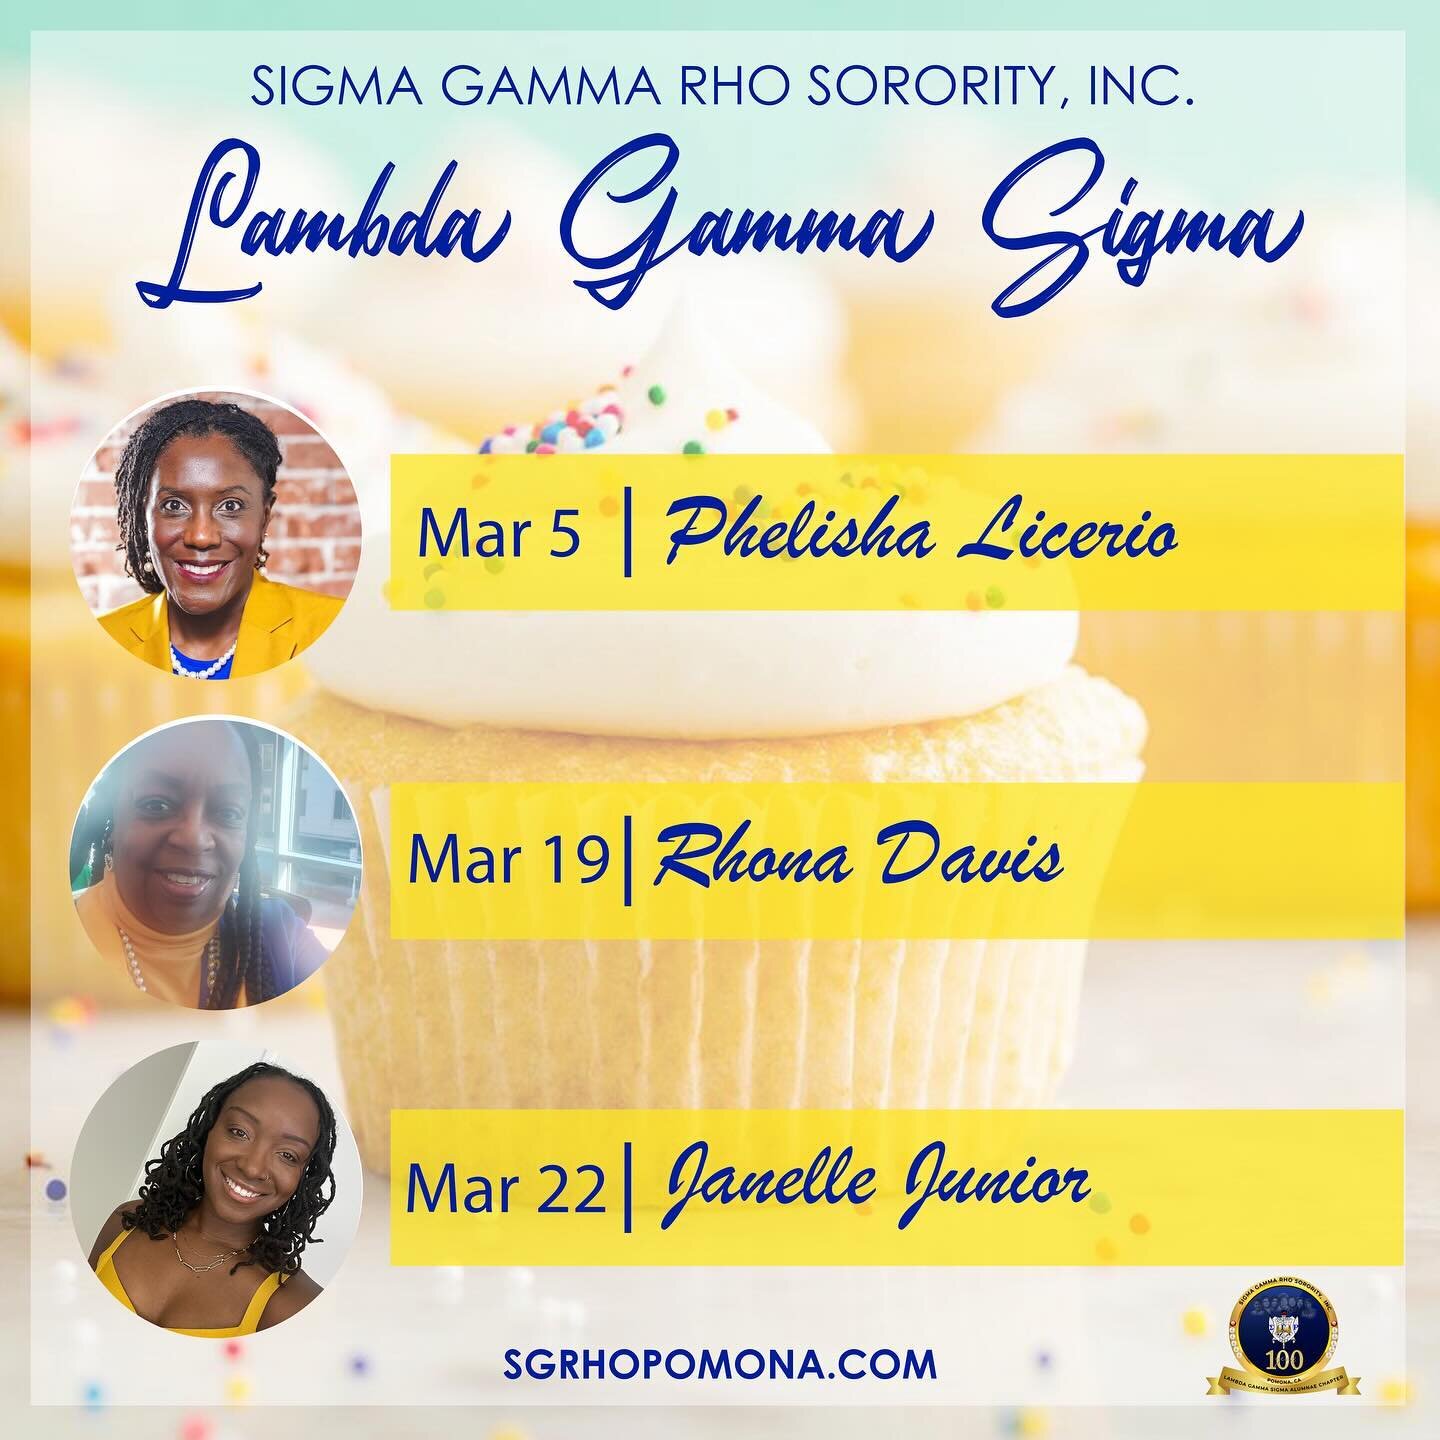 Lambda Gamma Sigma - The Pomona Valley Alumnae Chapter would like to send a special birthday shoutout to all our March Birthday Sorors! 💙💛 We love you and hope you had a great birthday month! 

@rhodeo_dryve 
@devineone.md 
@jayynelly 
@neishasanfo